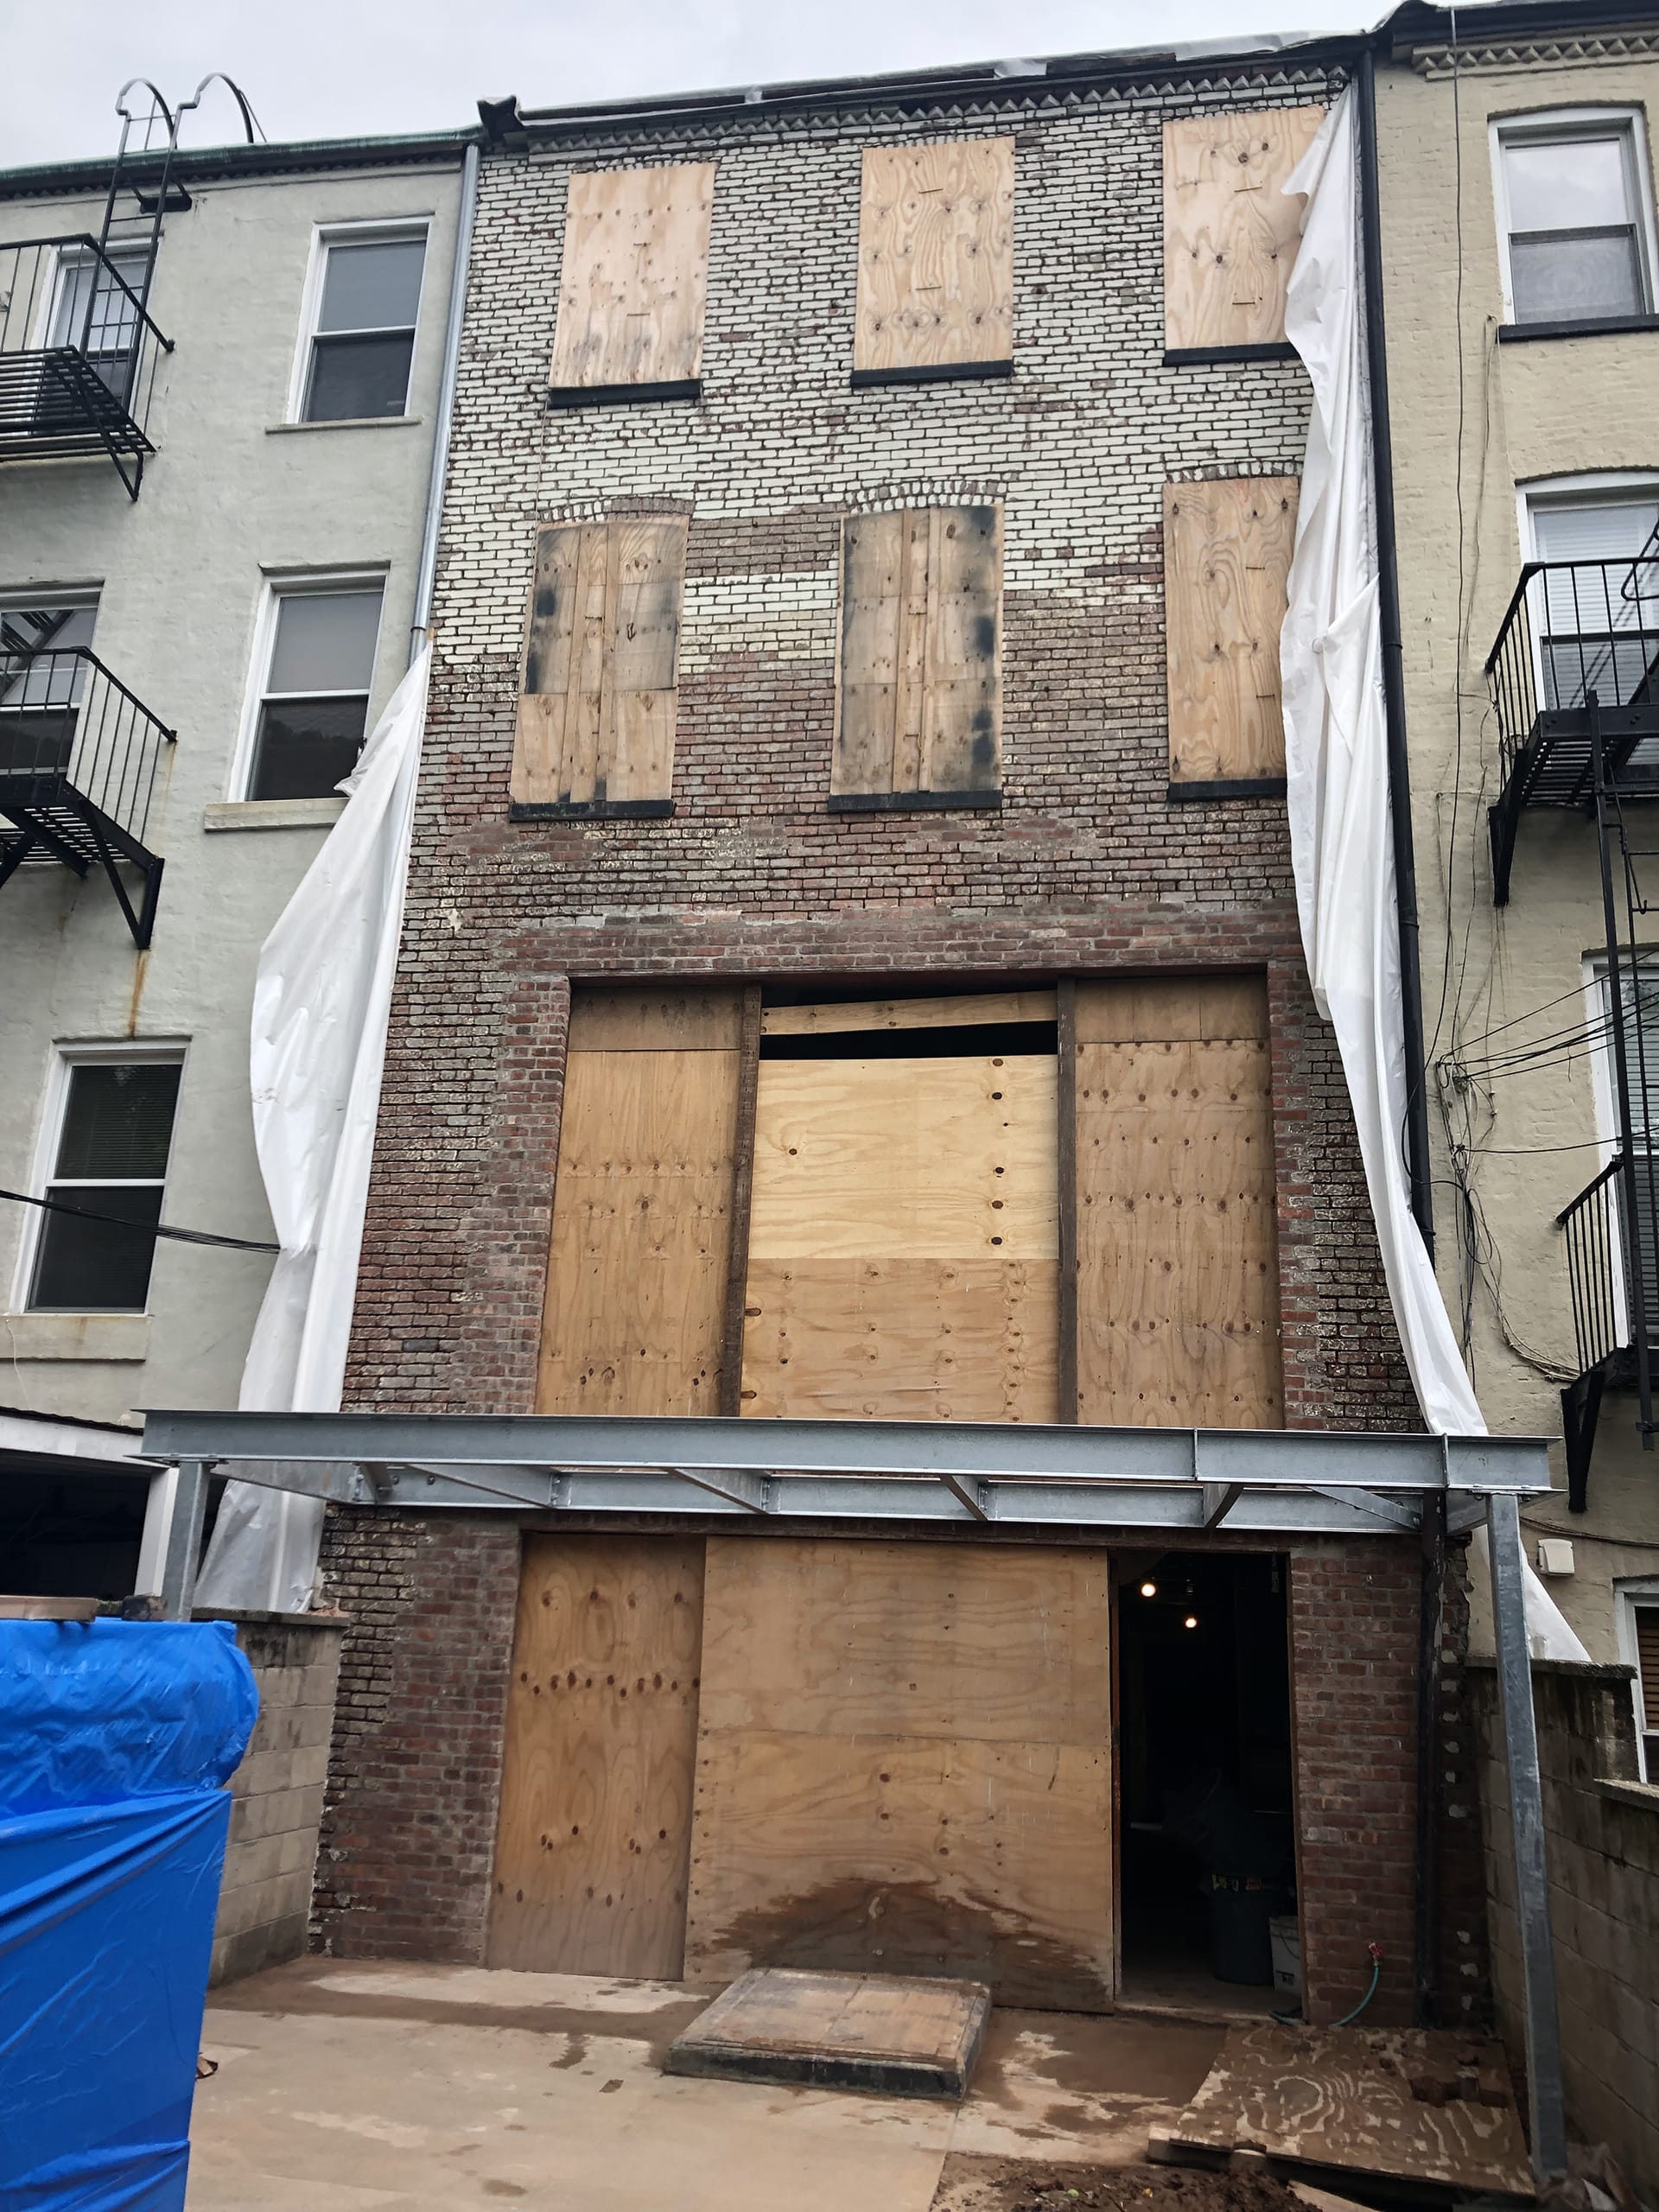 Rear facade of a brick Carroll Gardens townhouse during construction, after brick has been stripped of weatherproof coating and is in the process of being repointed